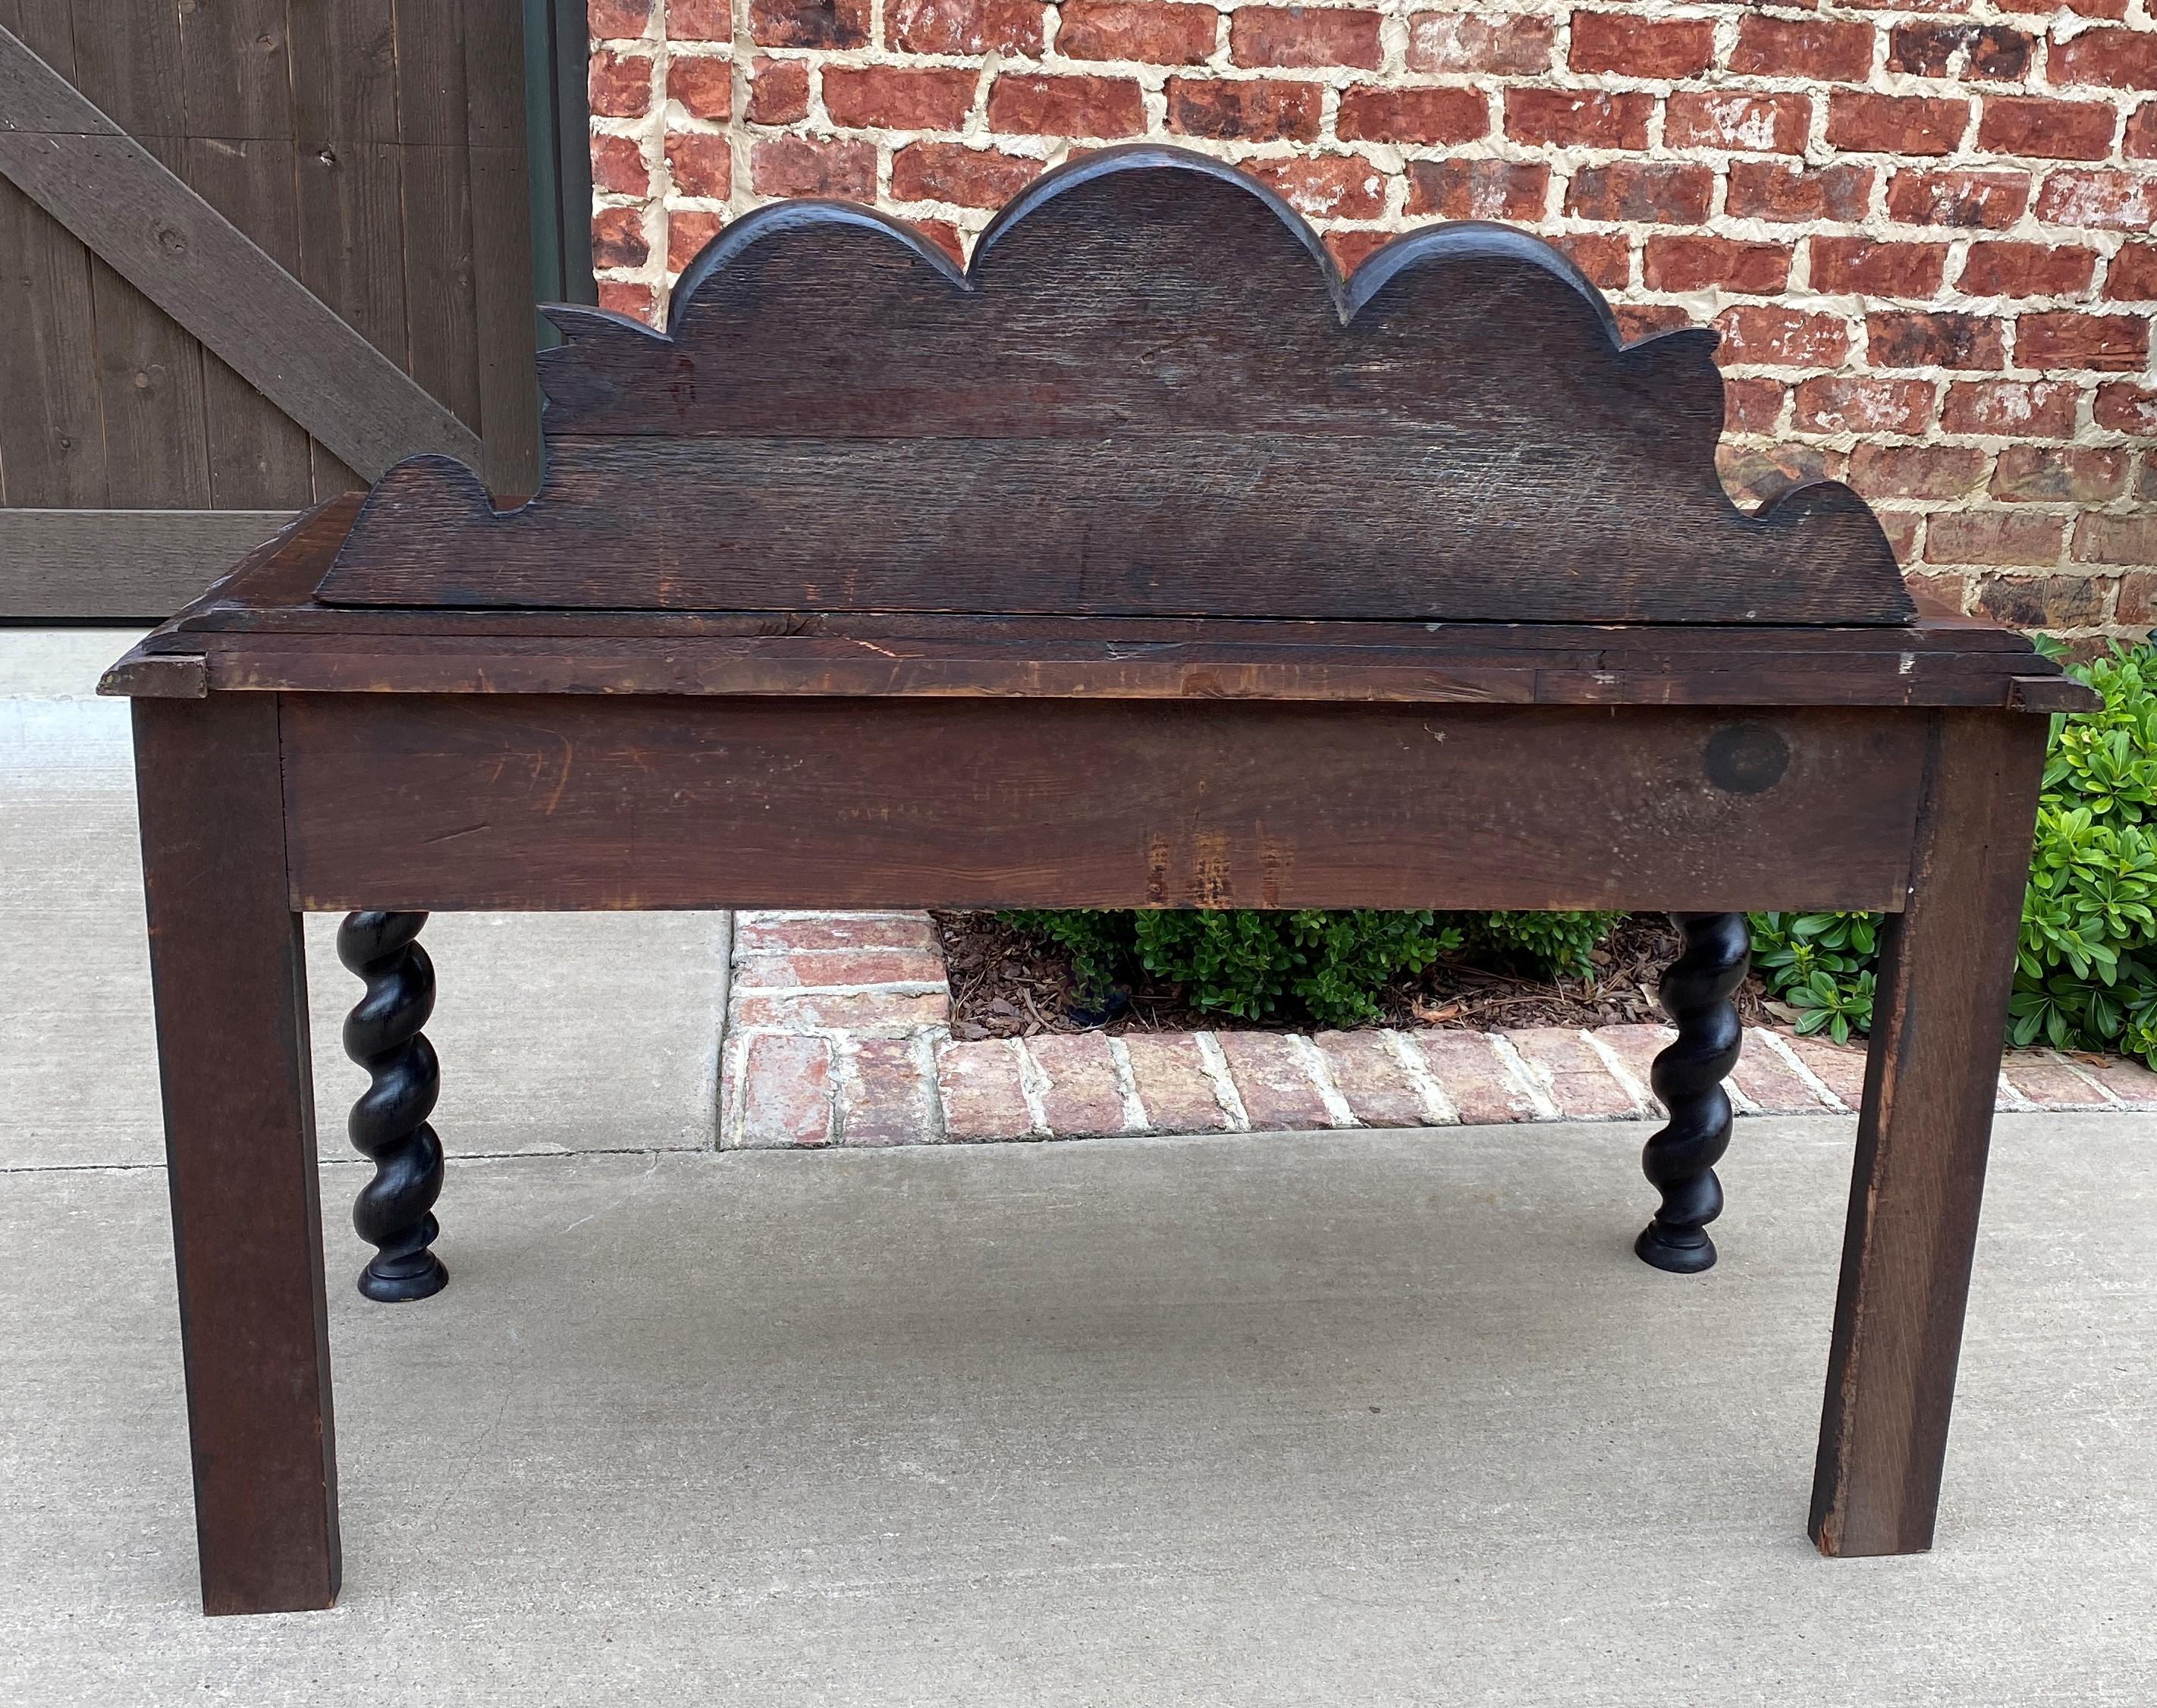 Antique English Window Bench Seat Bed Bench Barley Twist Drawer Makers Tag 1900 3